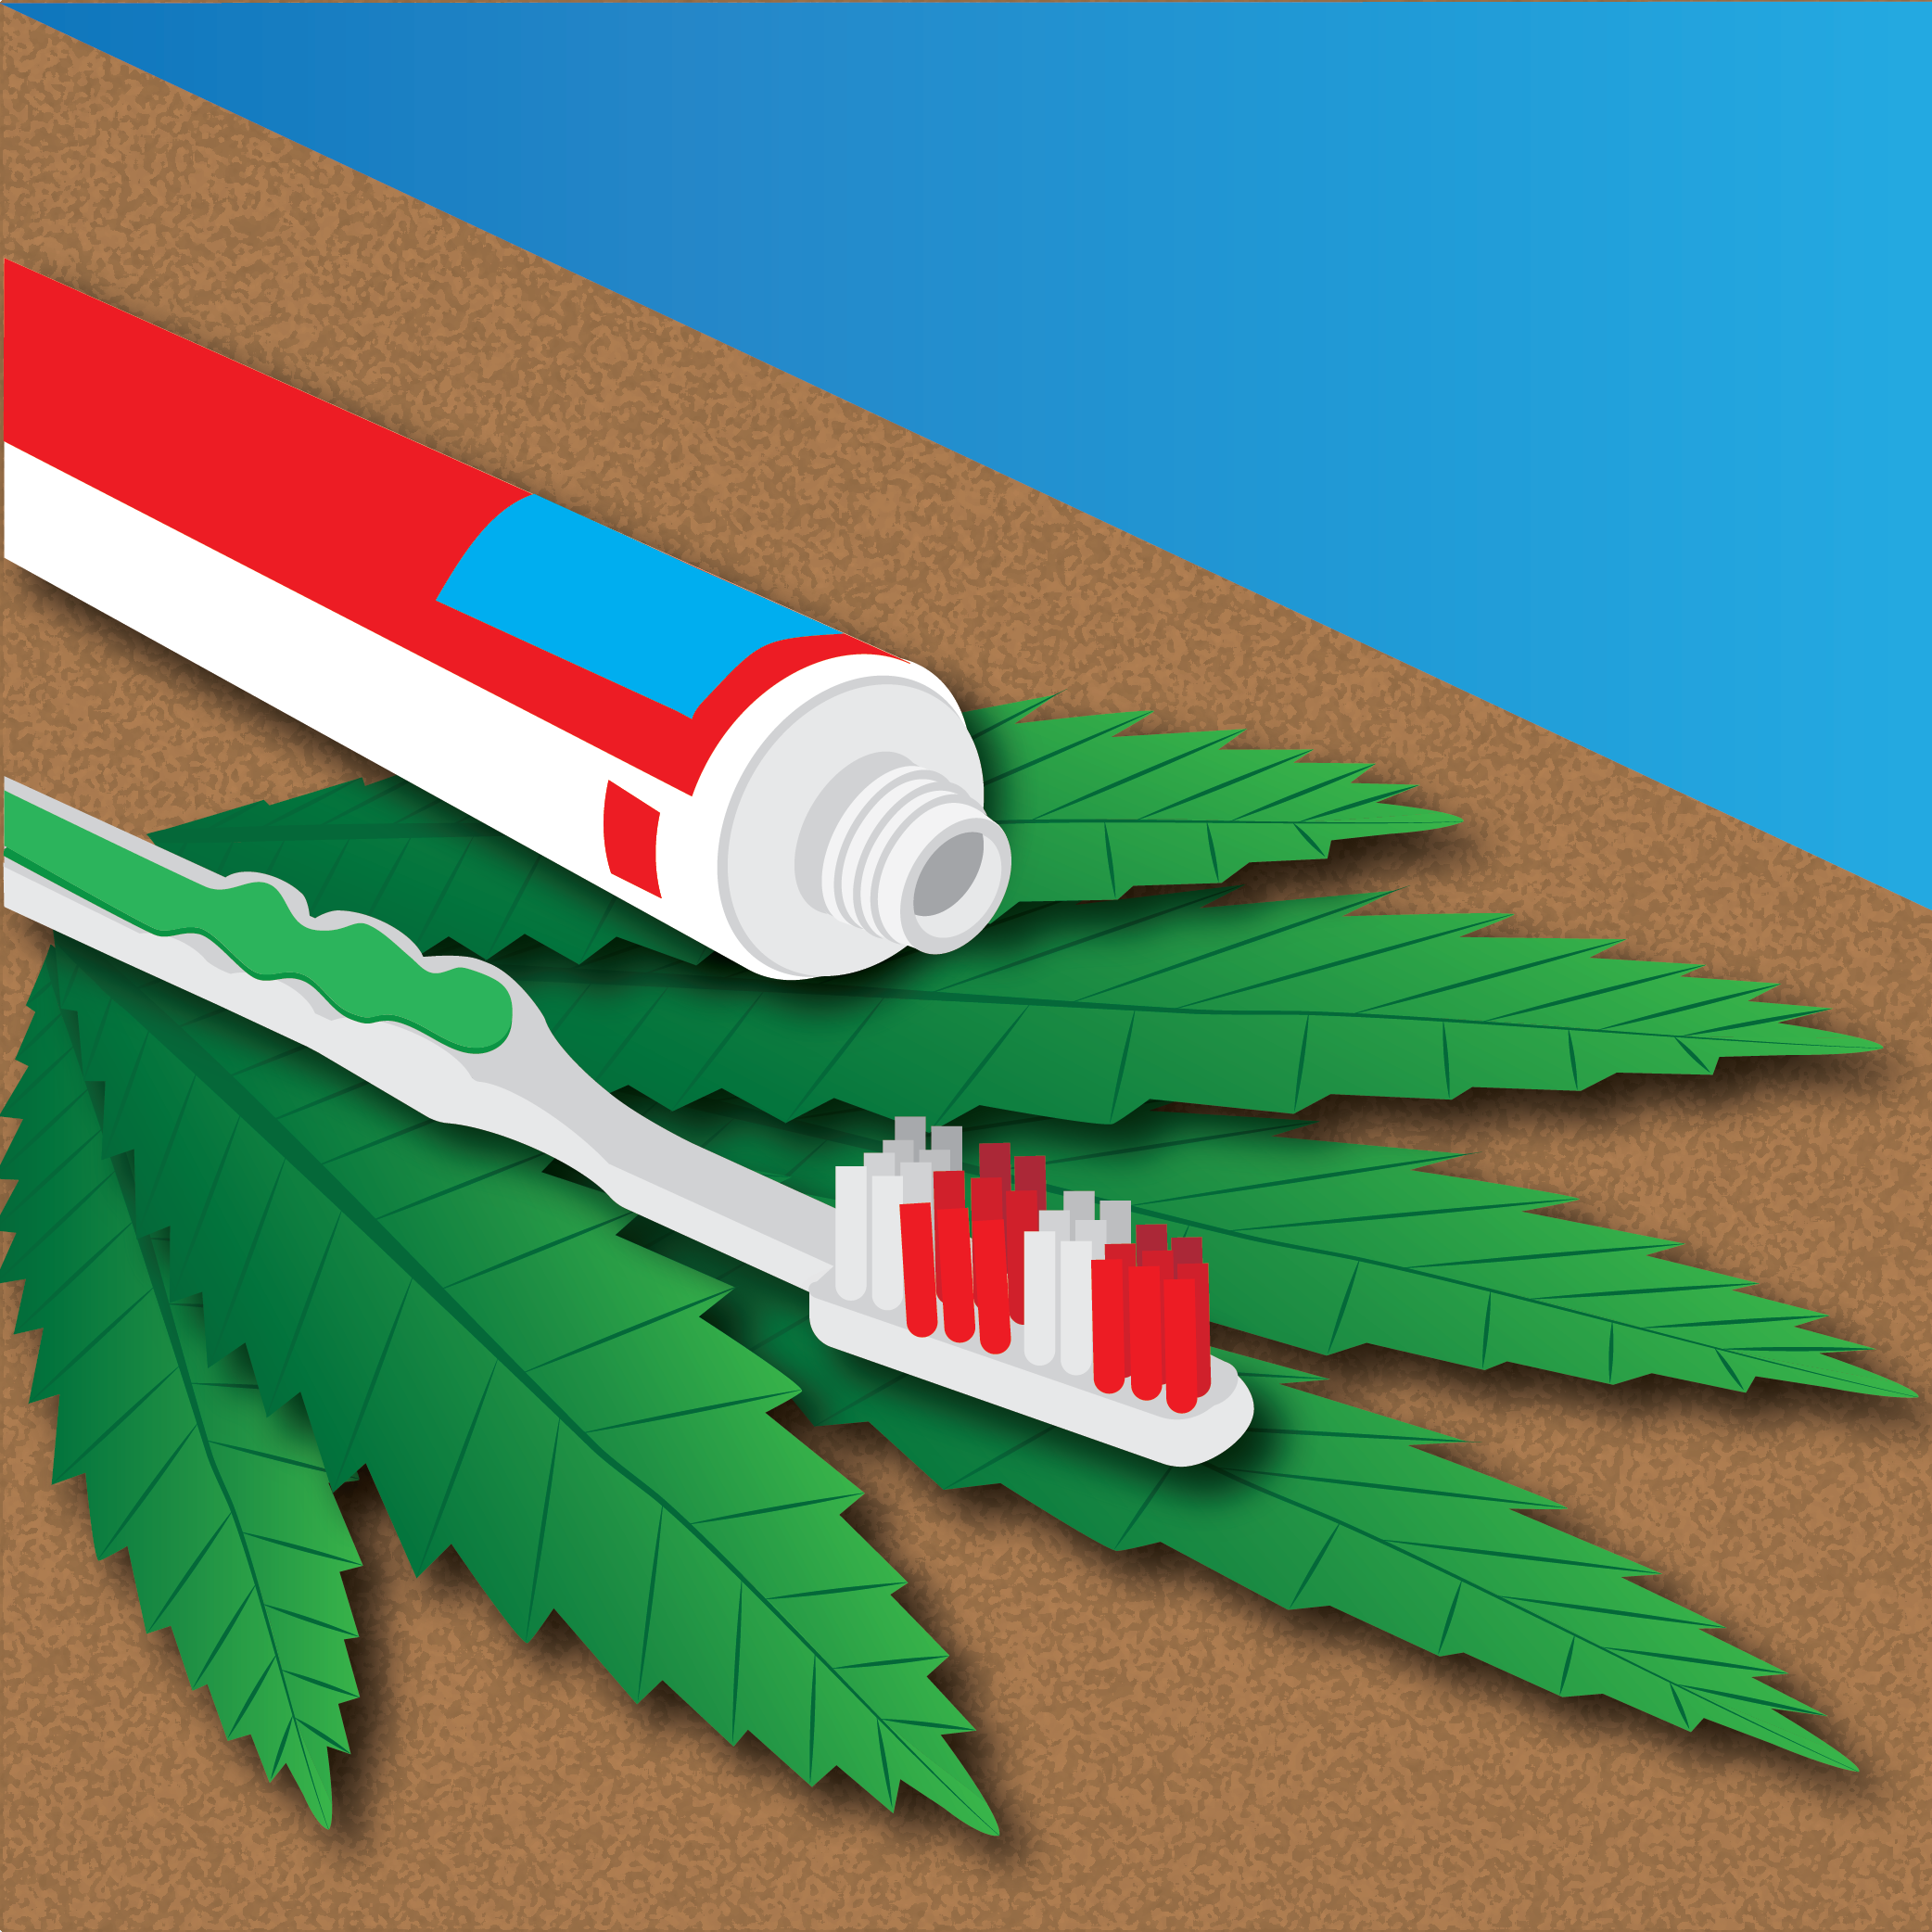 Illustration of toothbrush and toothpaste with a marijuana leaf behind them